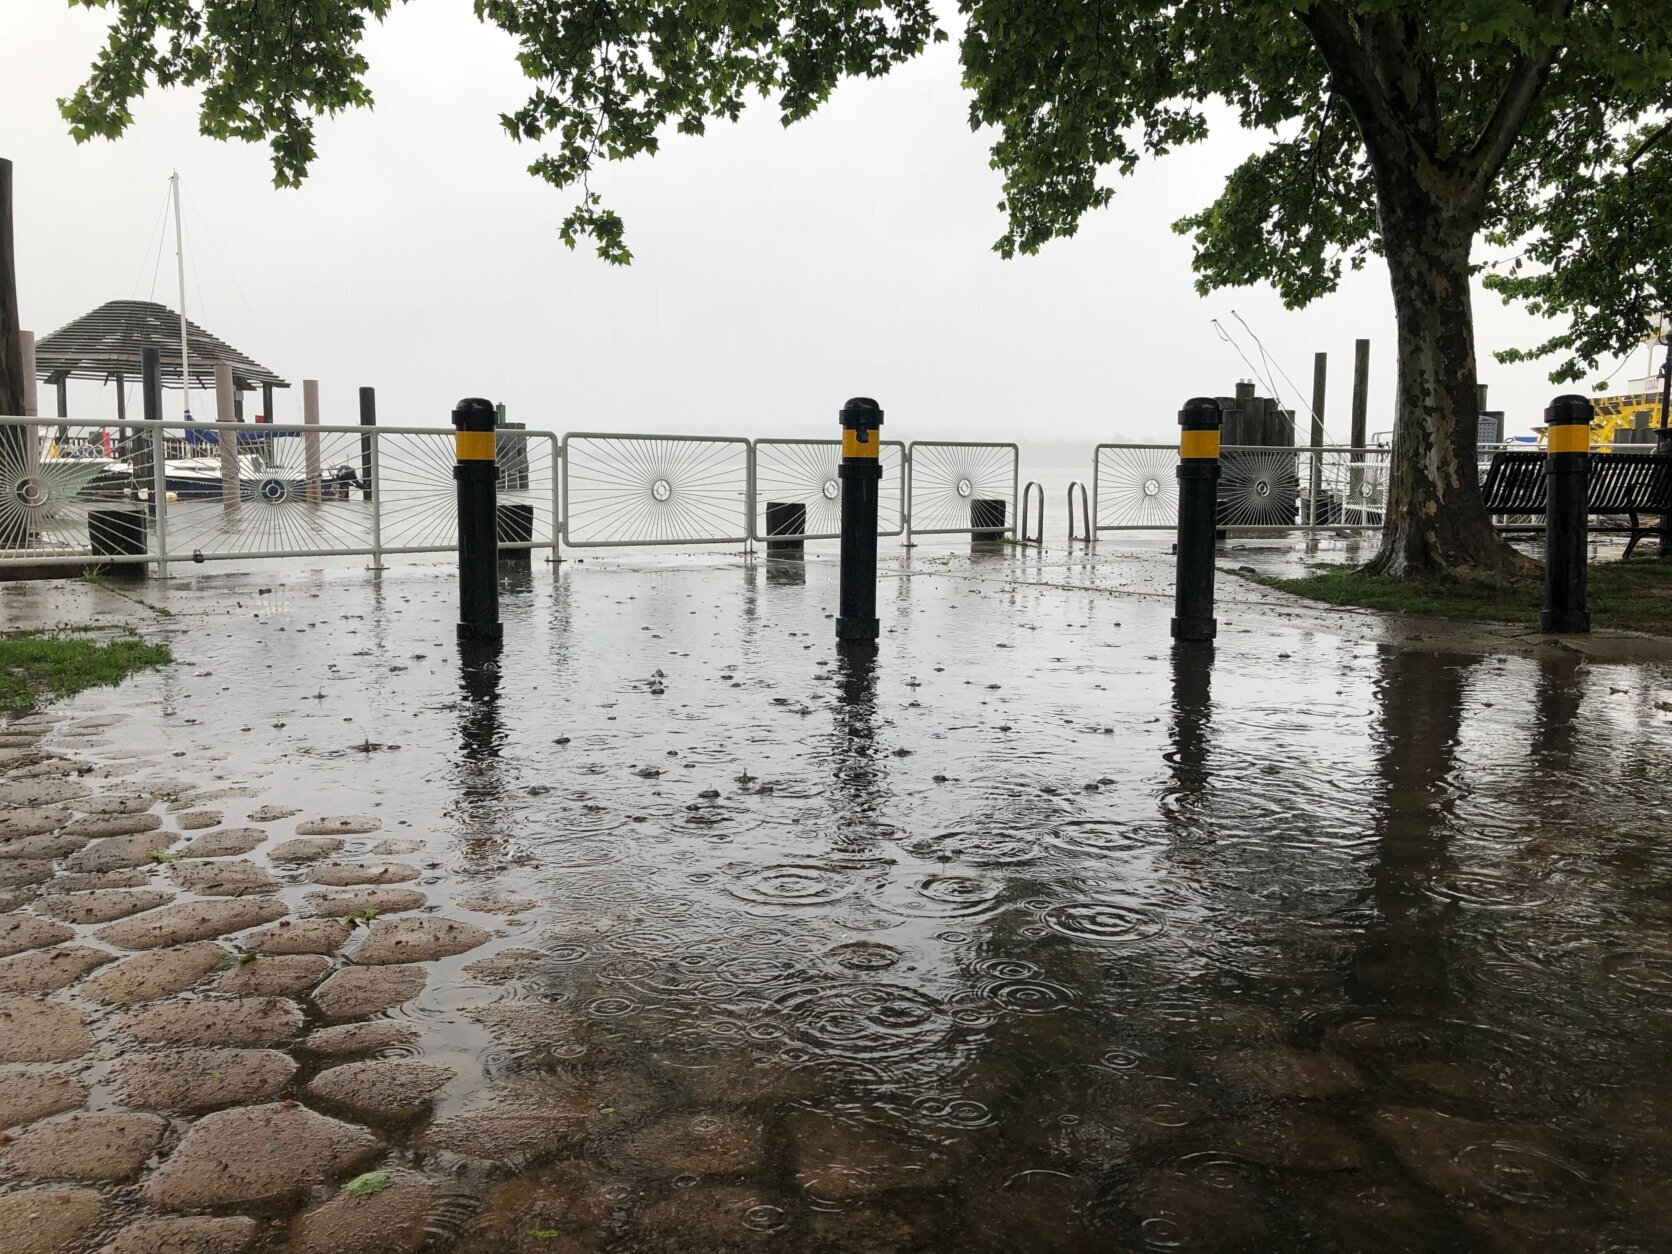 "In old town Alexandria the water was rising at Founders Park and paths roads and sidewalks were seeing some standing water," WTOP's Valerie Bonk reports.